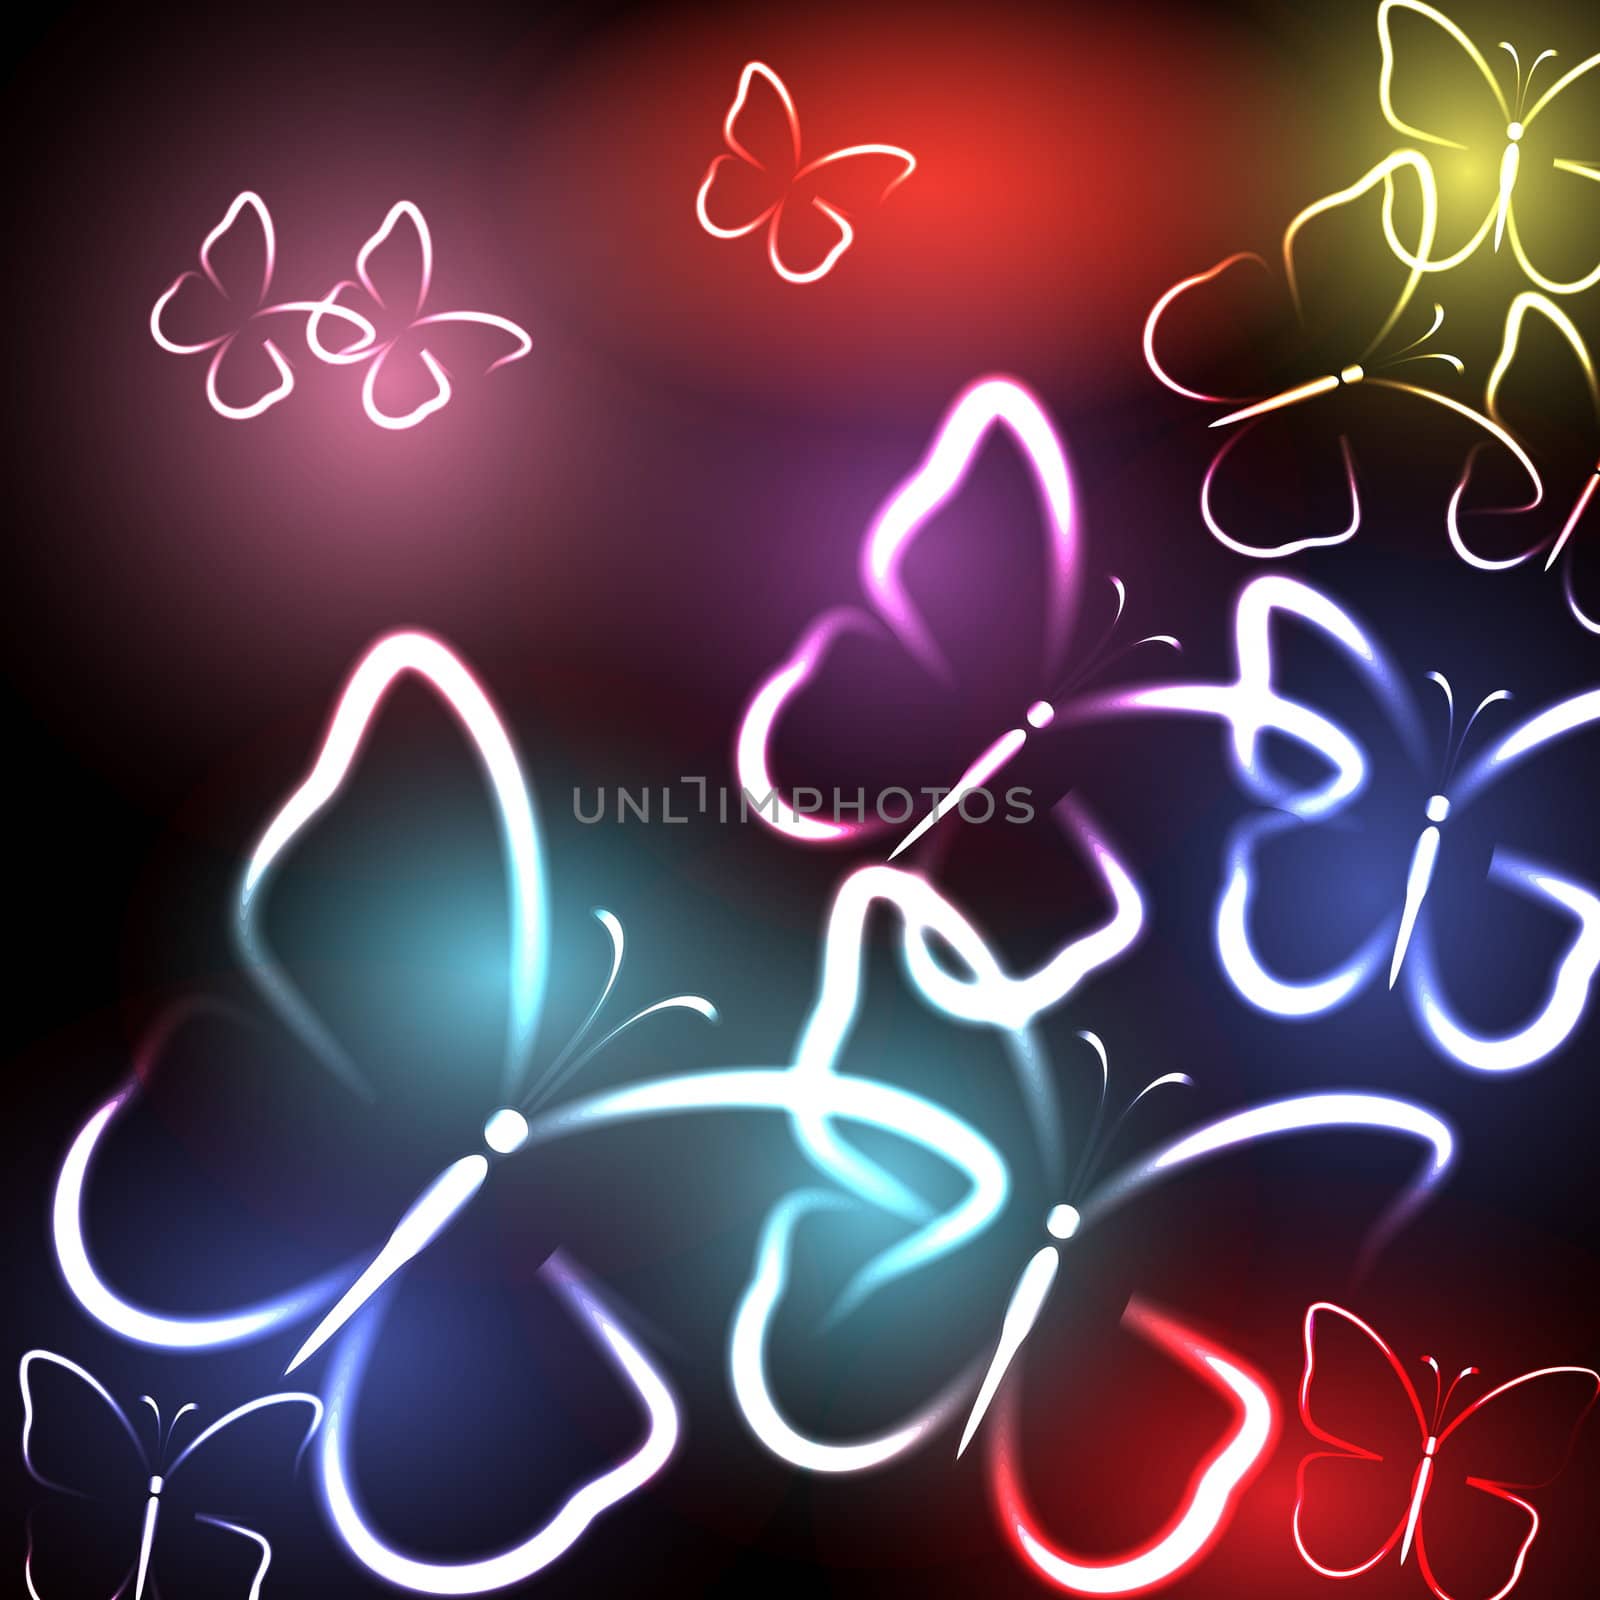 Glowing abstract background with butterfly, illustration for your design by svtrotof